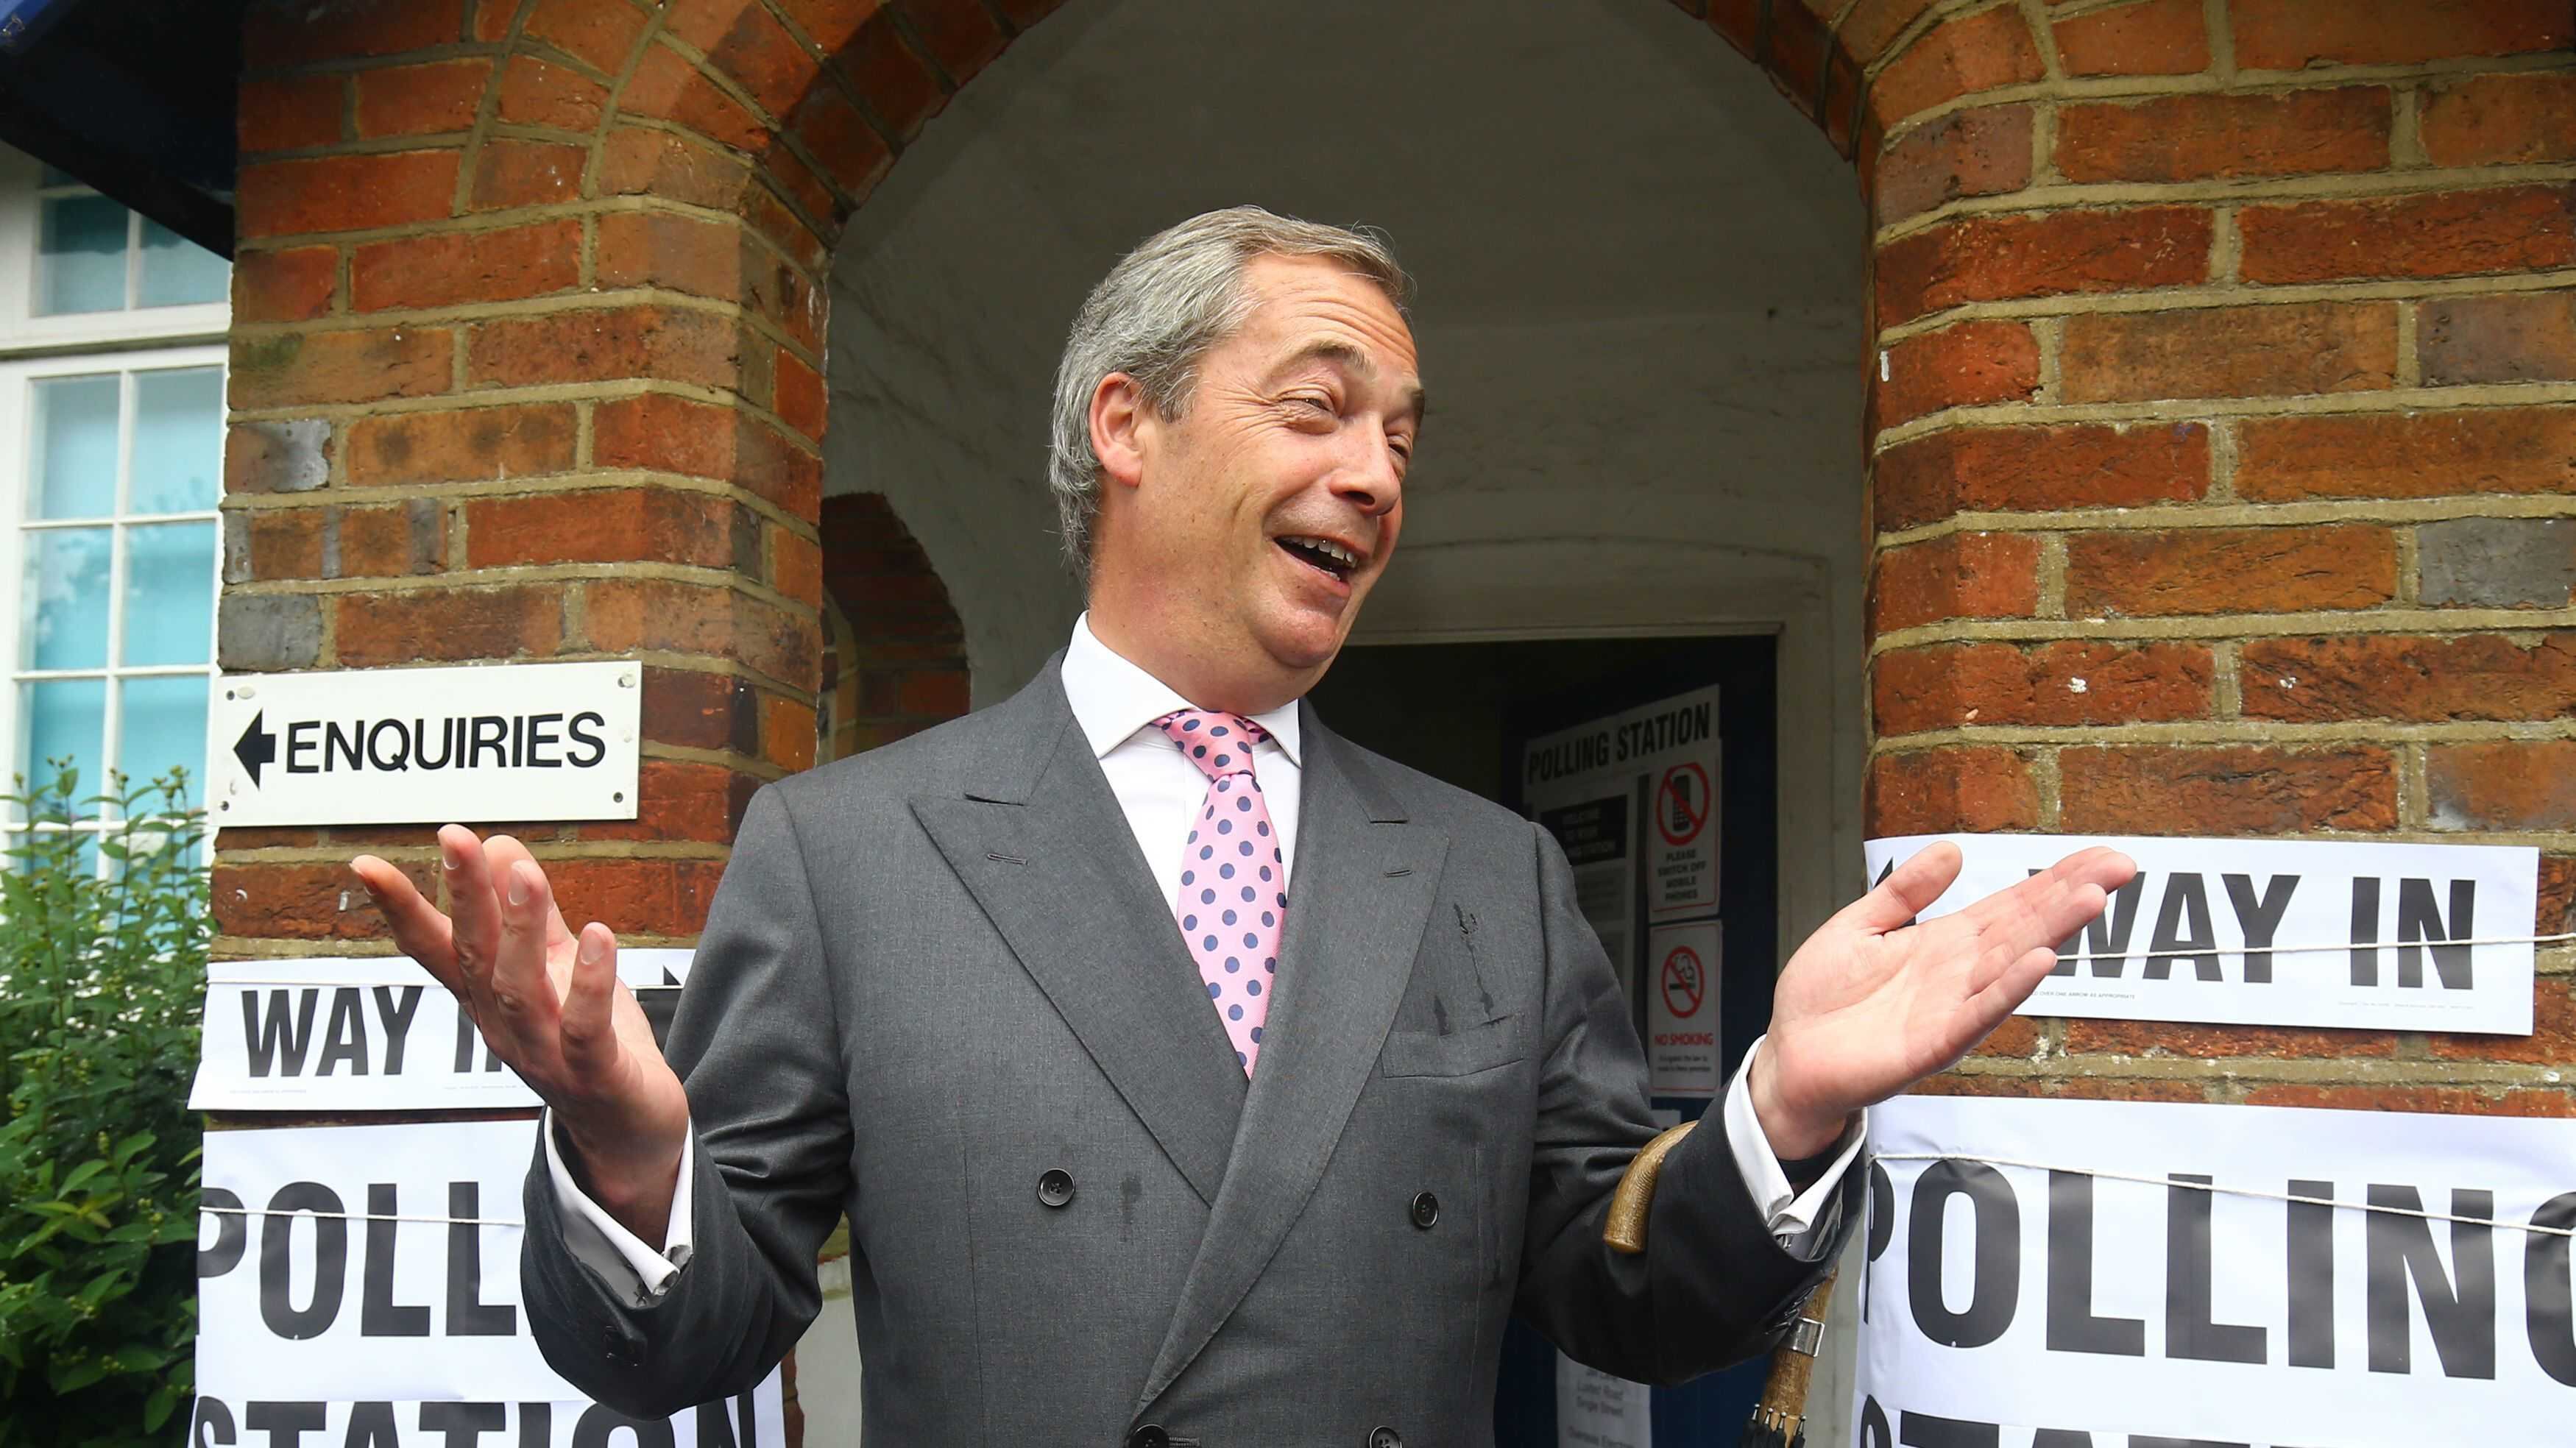 Nigel Farage, pictured outside his local polling station this morning, appeared to concede defeat in his campaign for a Leave vote in the EU referendum&nbsp;